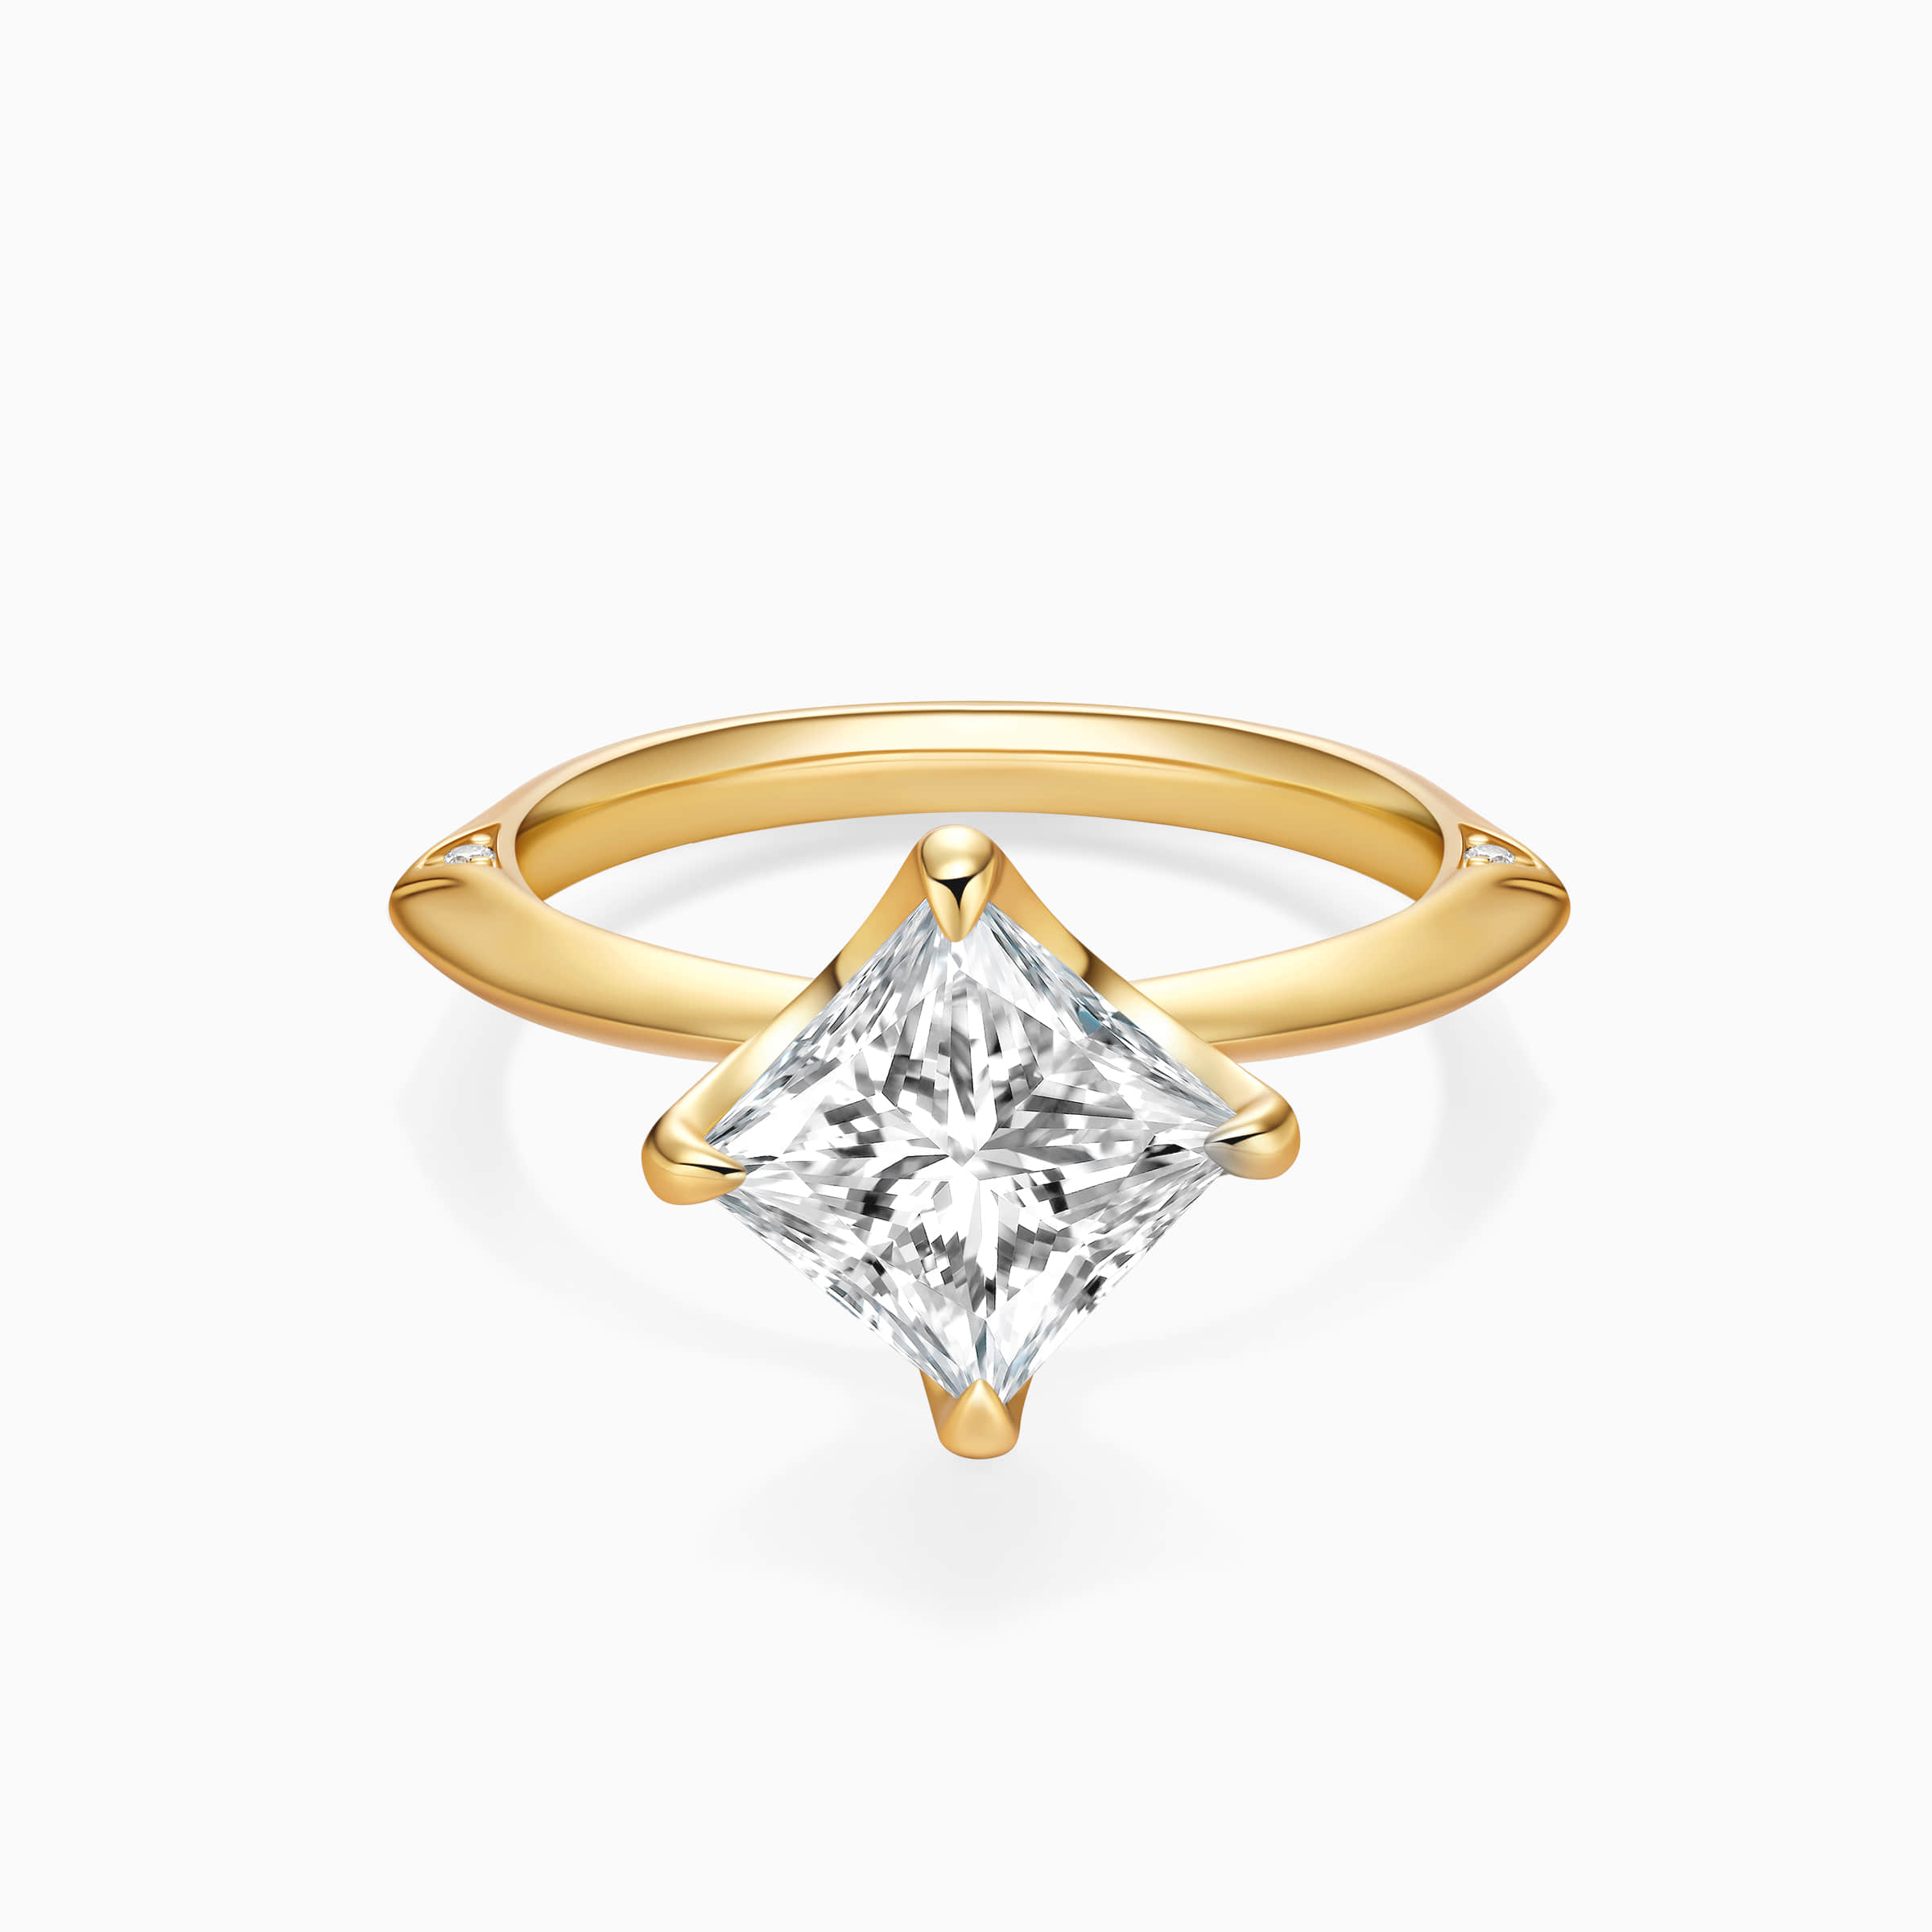 Darry Ring solitaire princess cut engagement ring in yellow gold